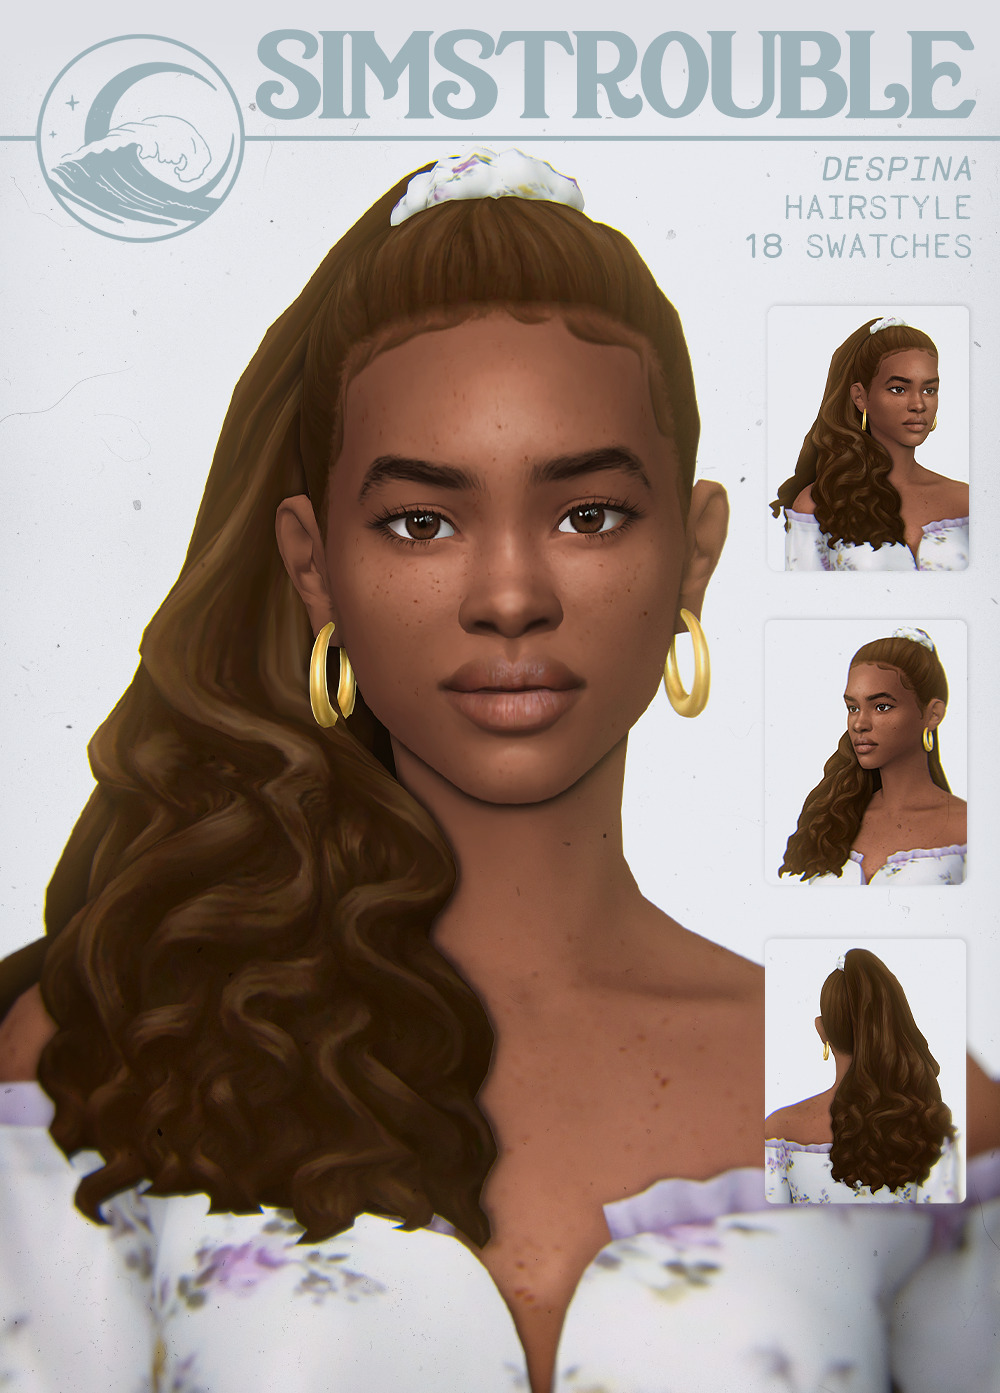 DESPINA Hair at SimsTrouble » Sims 4 Updates